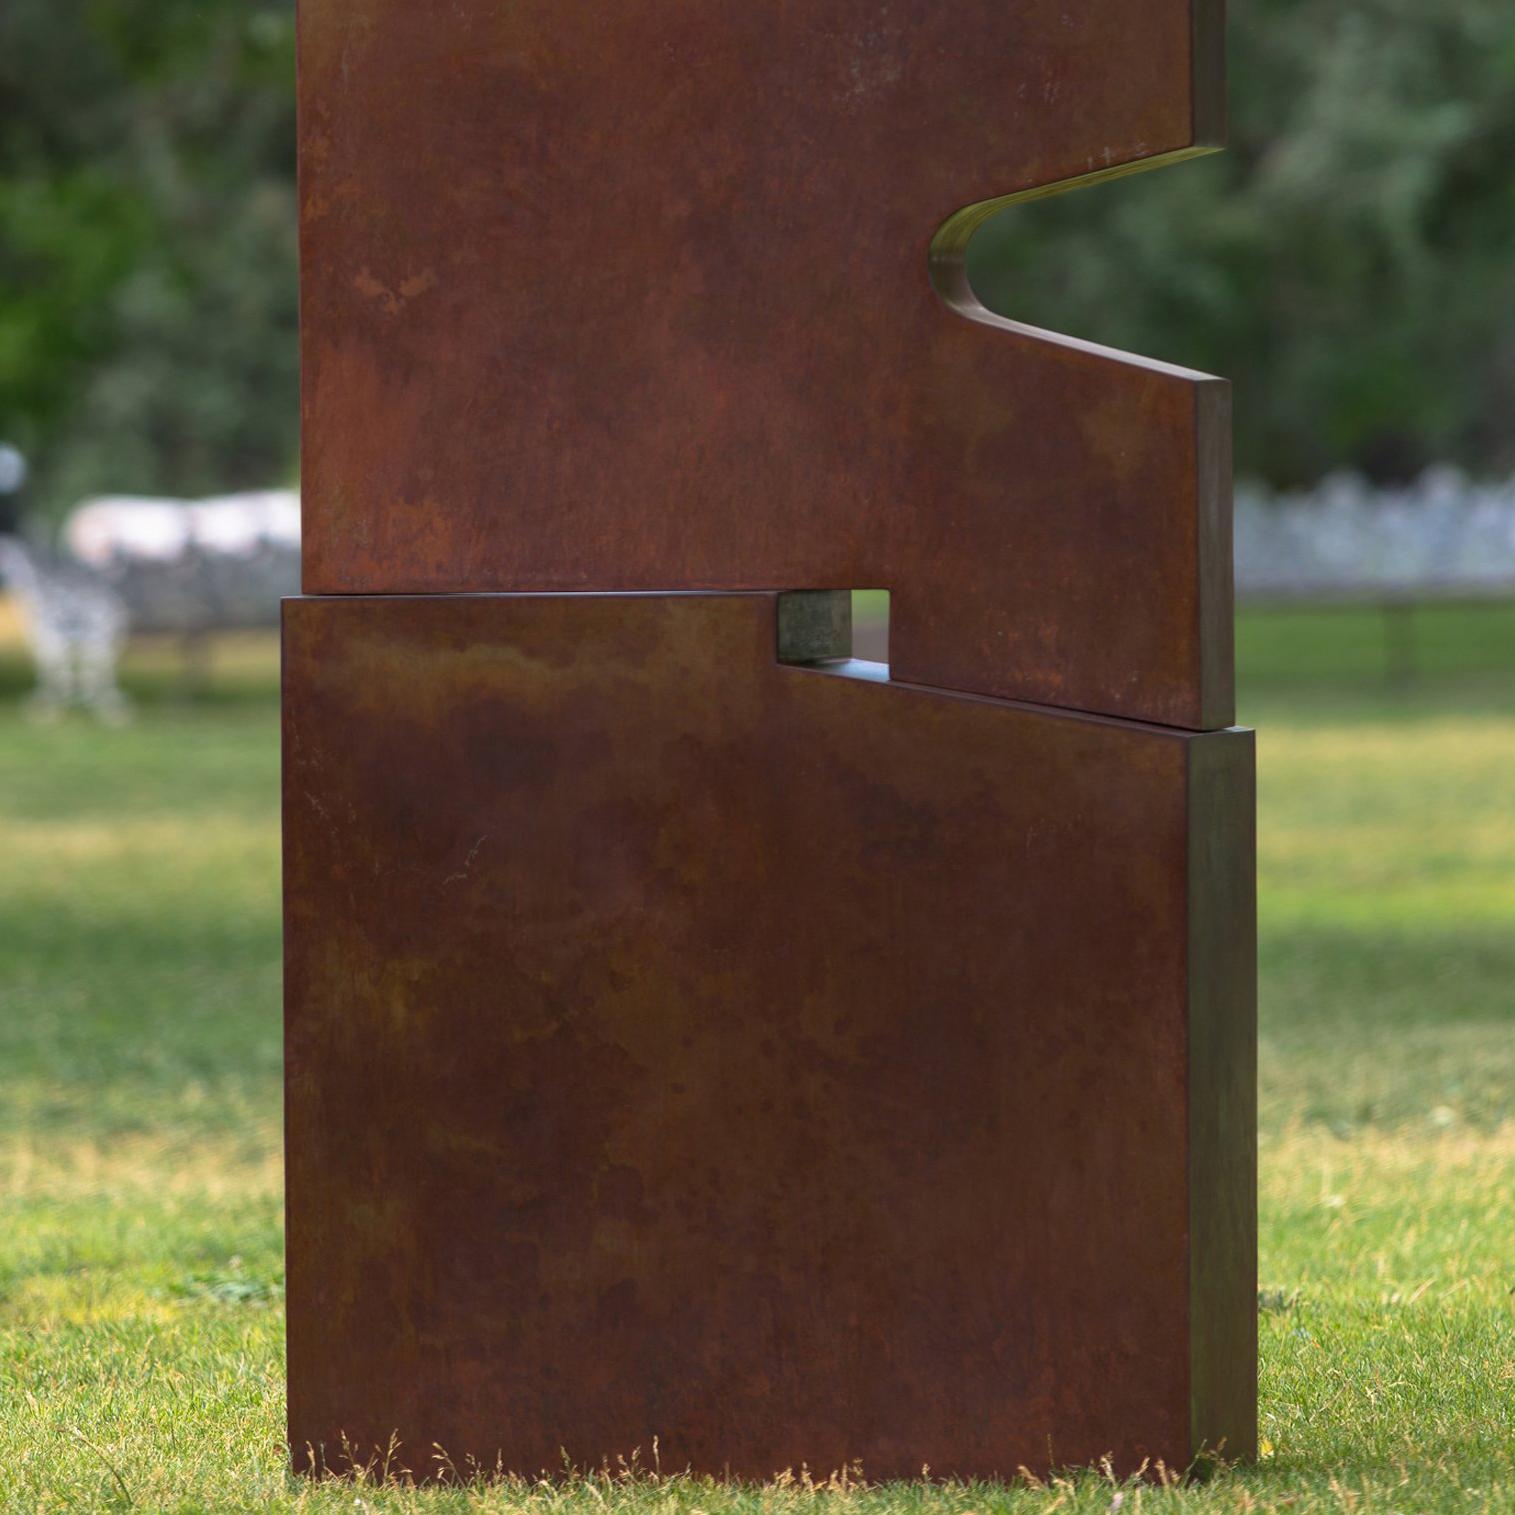 PALLO 8
Outdoor and Indoor sculpture
Steel 

Pascal creates an extraordinary range of abstract meditations that seem to arise directly from the medium itself, rather than from a conscious plan. 

His contemporary sculptures have been exhibited in